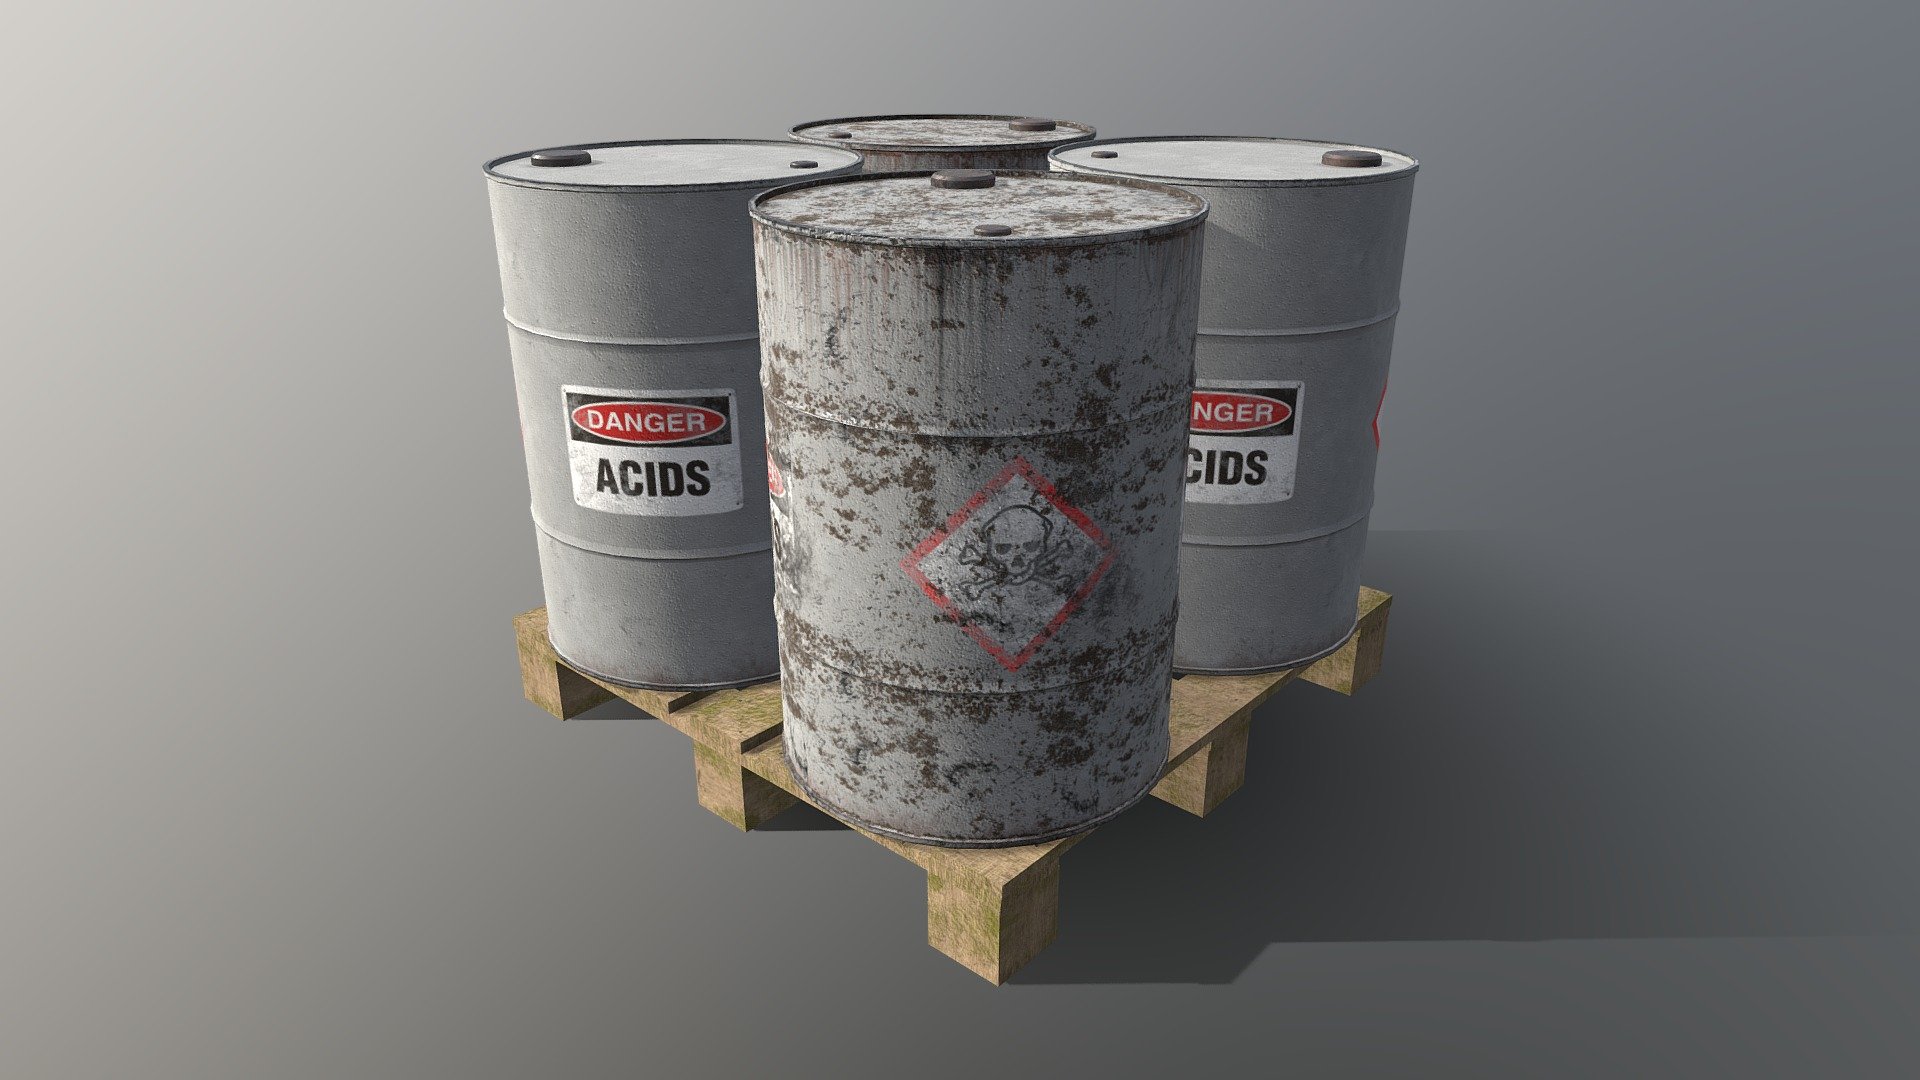 Oil Storage Drums - White

55 Gallon Oil Drums

Created in Blender 2.79/2.80

Textured in Substance Painter 2

2K Resolution

BaseColor, Metallic, Roughness, Normal Maps + Height Maps if you wish to use them also

Low Poly Models

Tested in 2.80 with the EEVEE Render engine

Nice Assets for your project

Detailed Models

Easily duplicate these Models for a rack of Oil Drums to fill out your scene

Please note if you are using EEVEE:

You may need to go into the Render Properties Tab - Performance - Enable High Quality Normals

Approximate Real World Scale Applied

3 Formats provided:  .blend , Fbx , Obj  + All Textures

Thanks for your interest &amp; support!

MagicCGIStudios - Oil Storage Drums - White - Buy Royalty Free 3D model by MagicCGIStudios 3d model